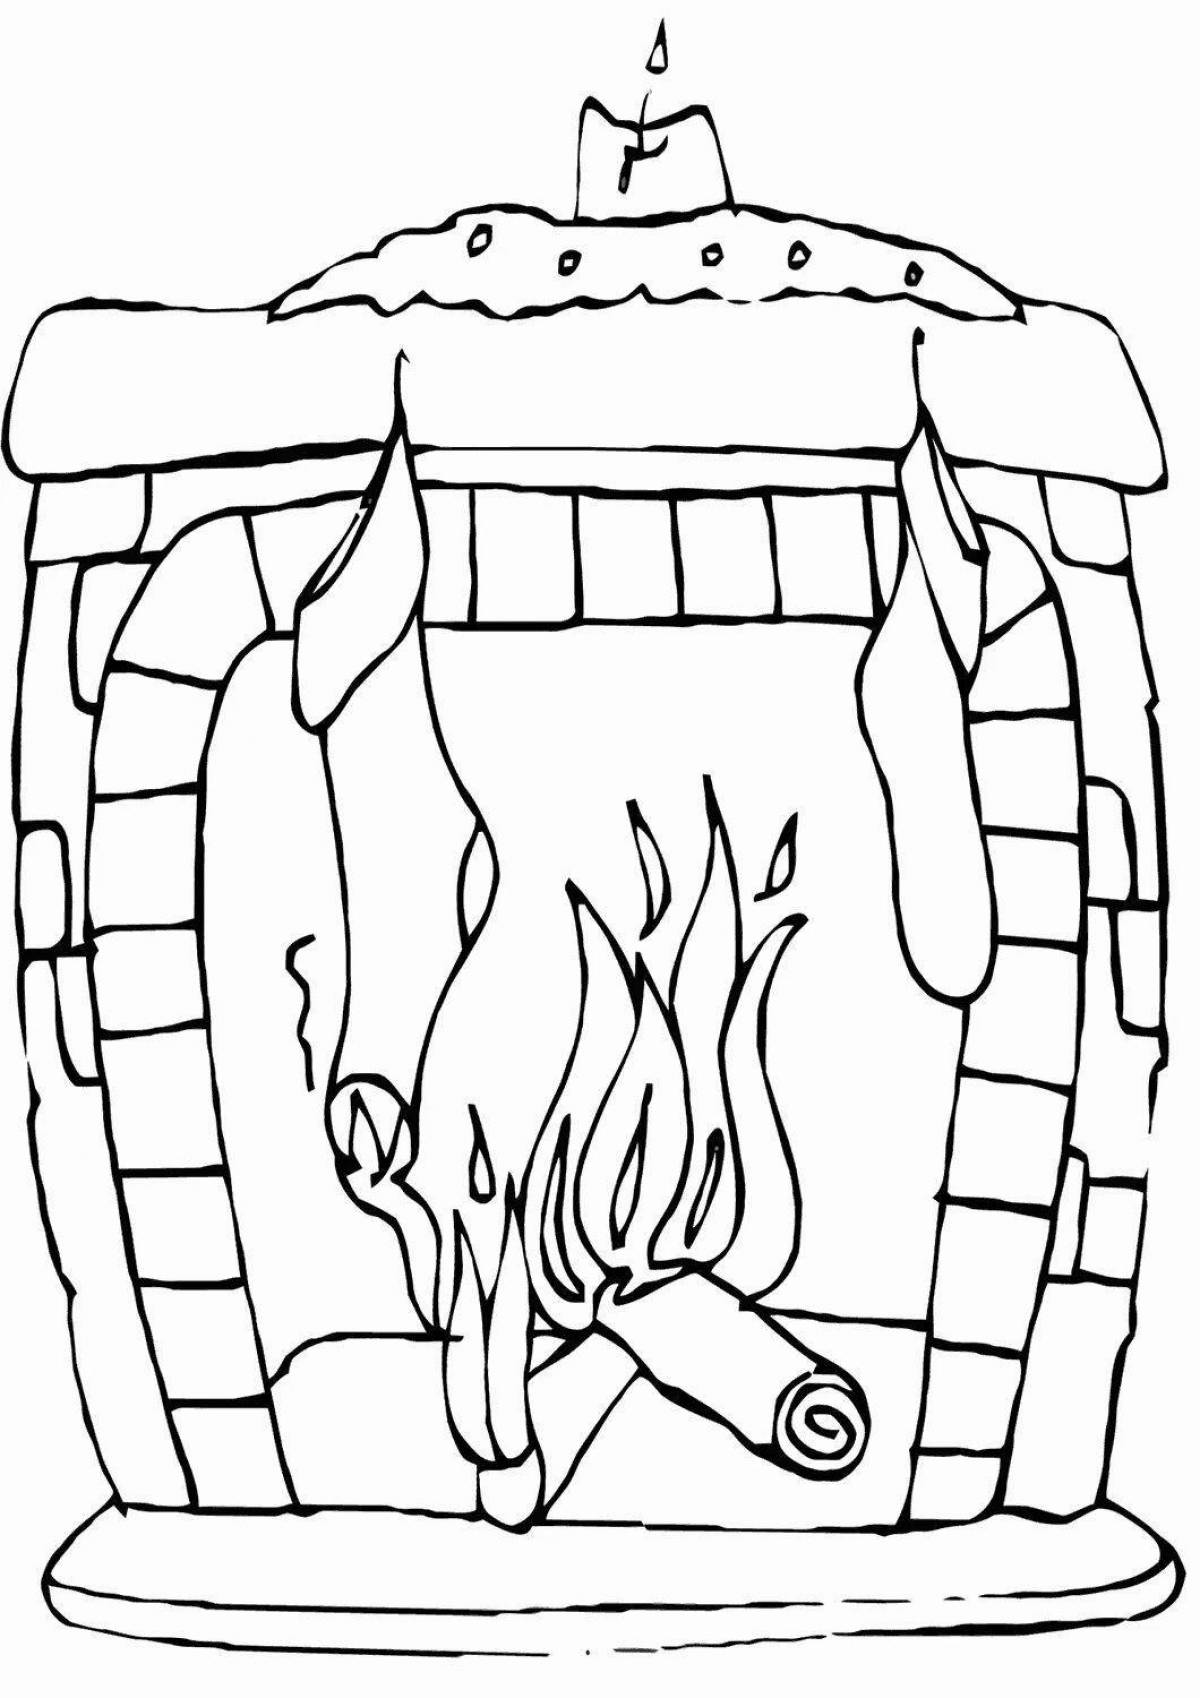 Shining fireplace coloring book for kids